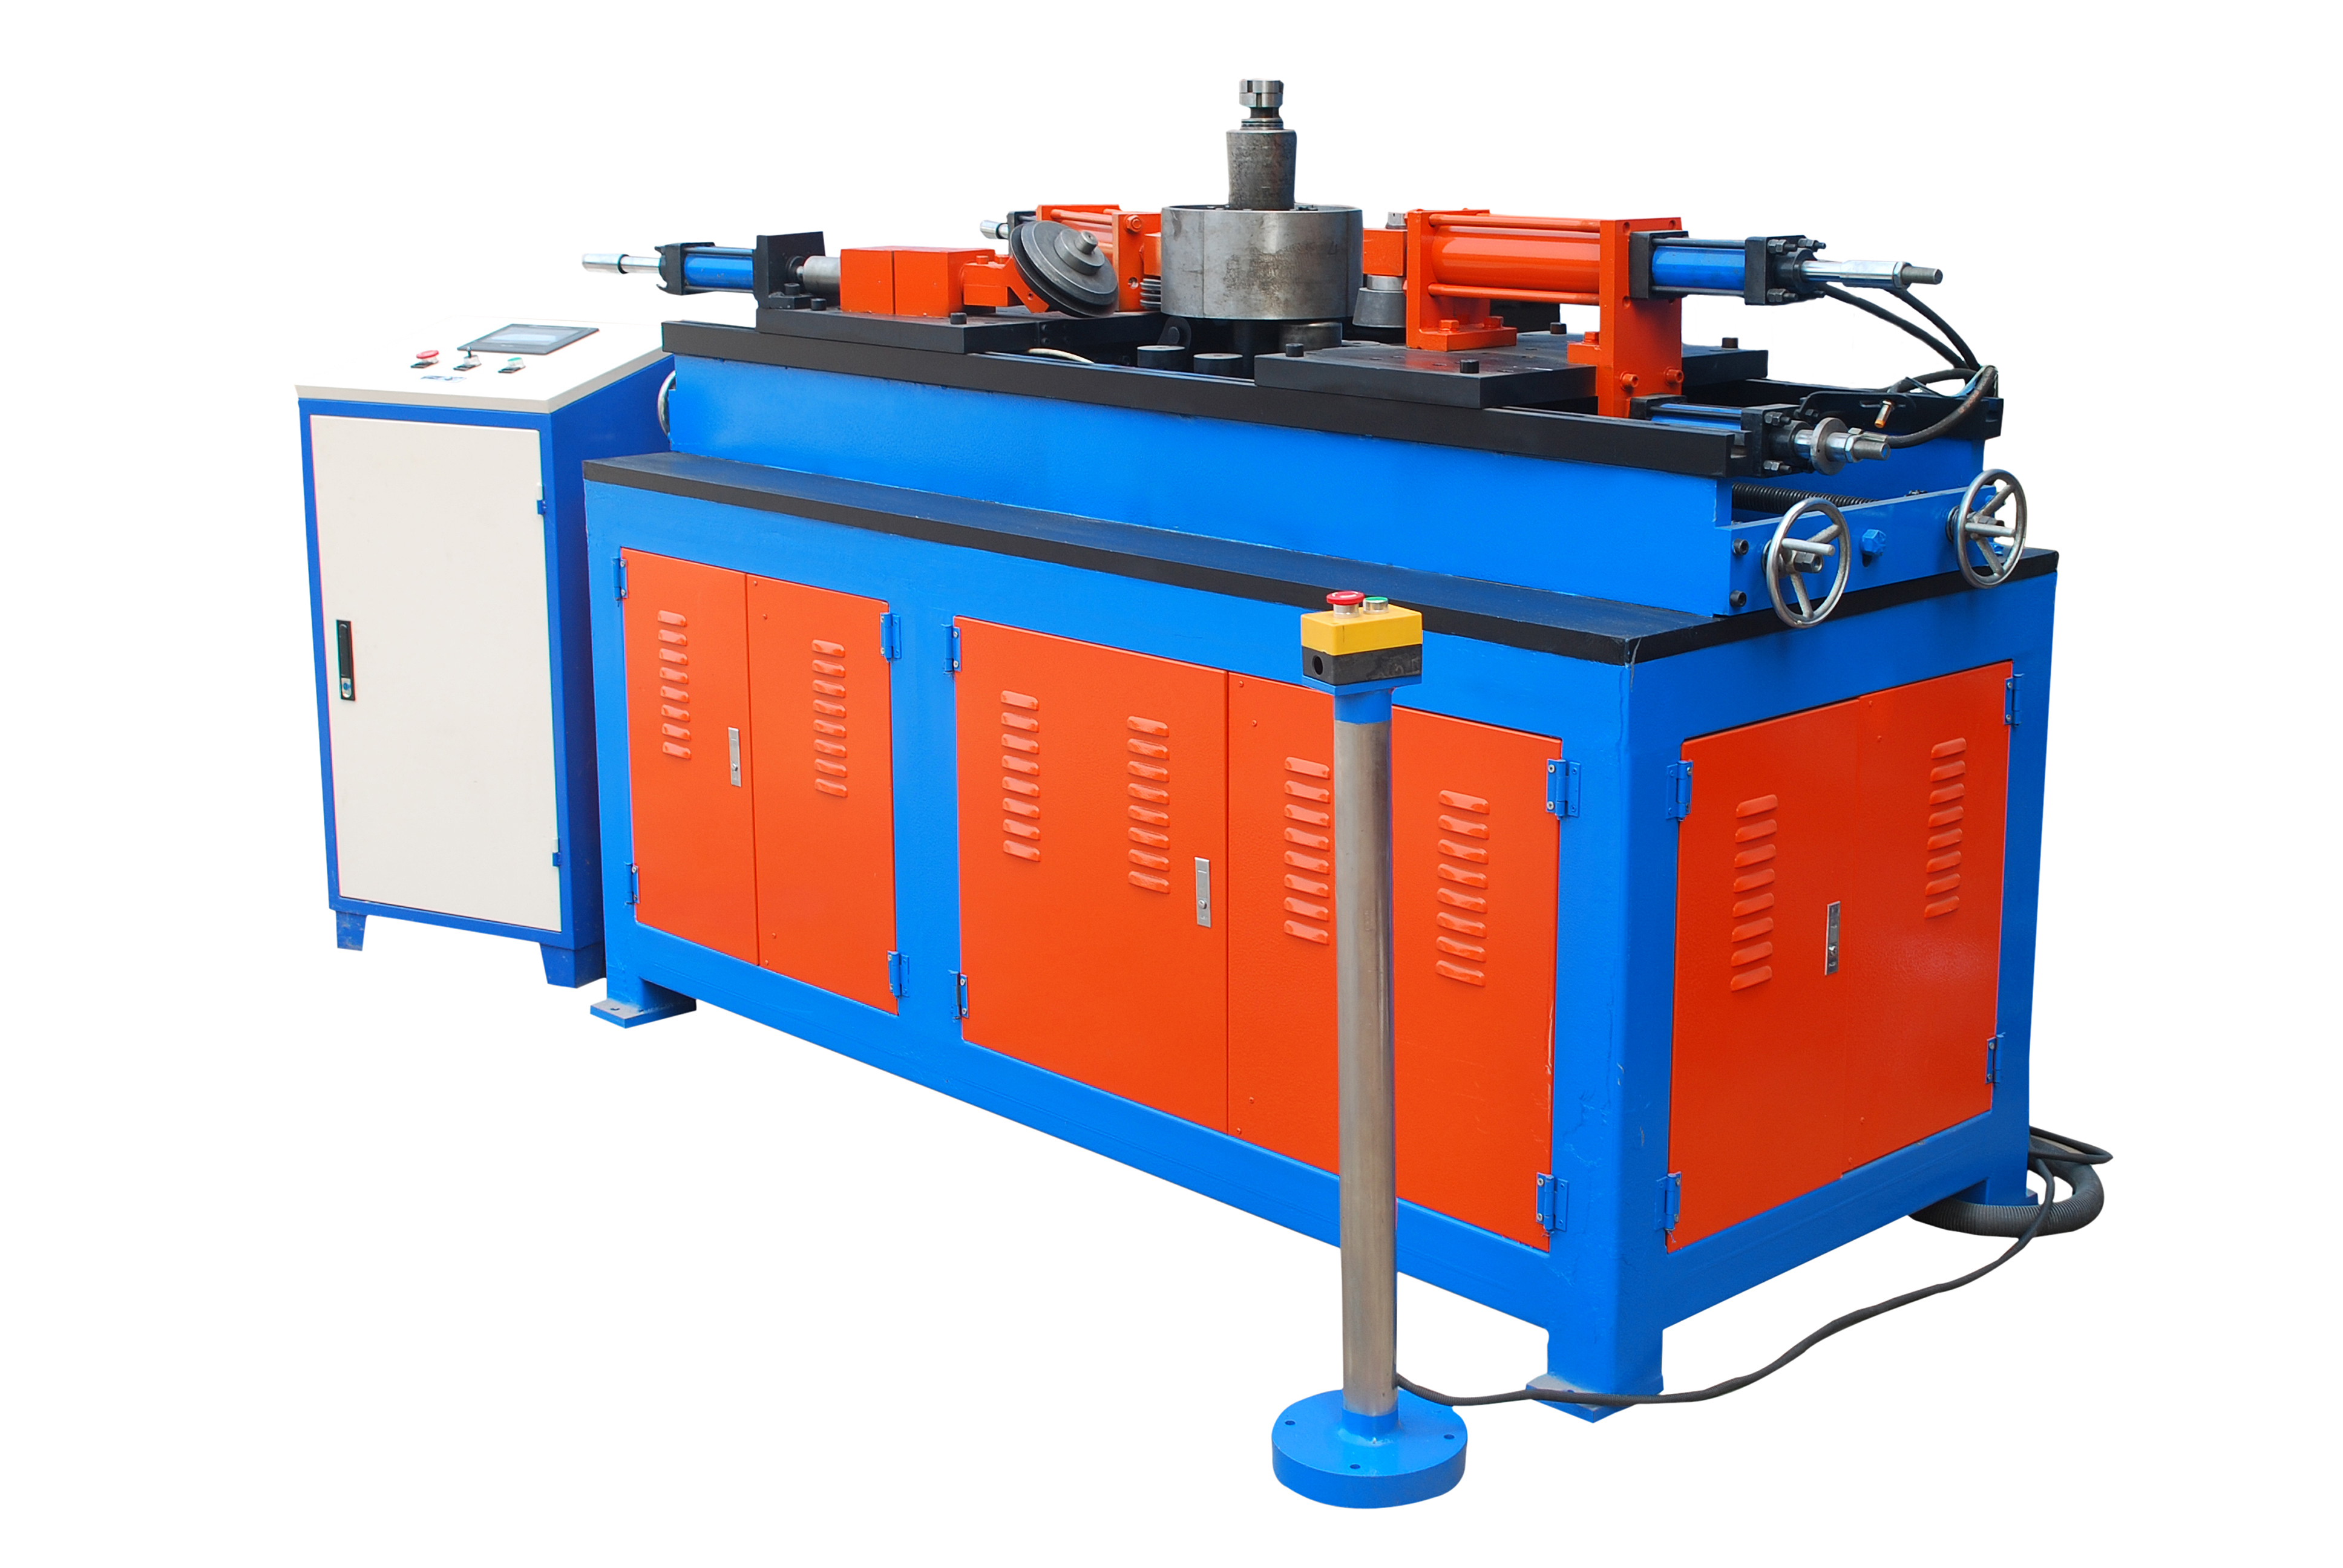 Machinery manufacturers produce air duct flanging equipment, square barrel equipment, lightweight body, two roller machine brand Debo